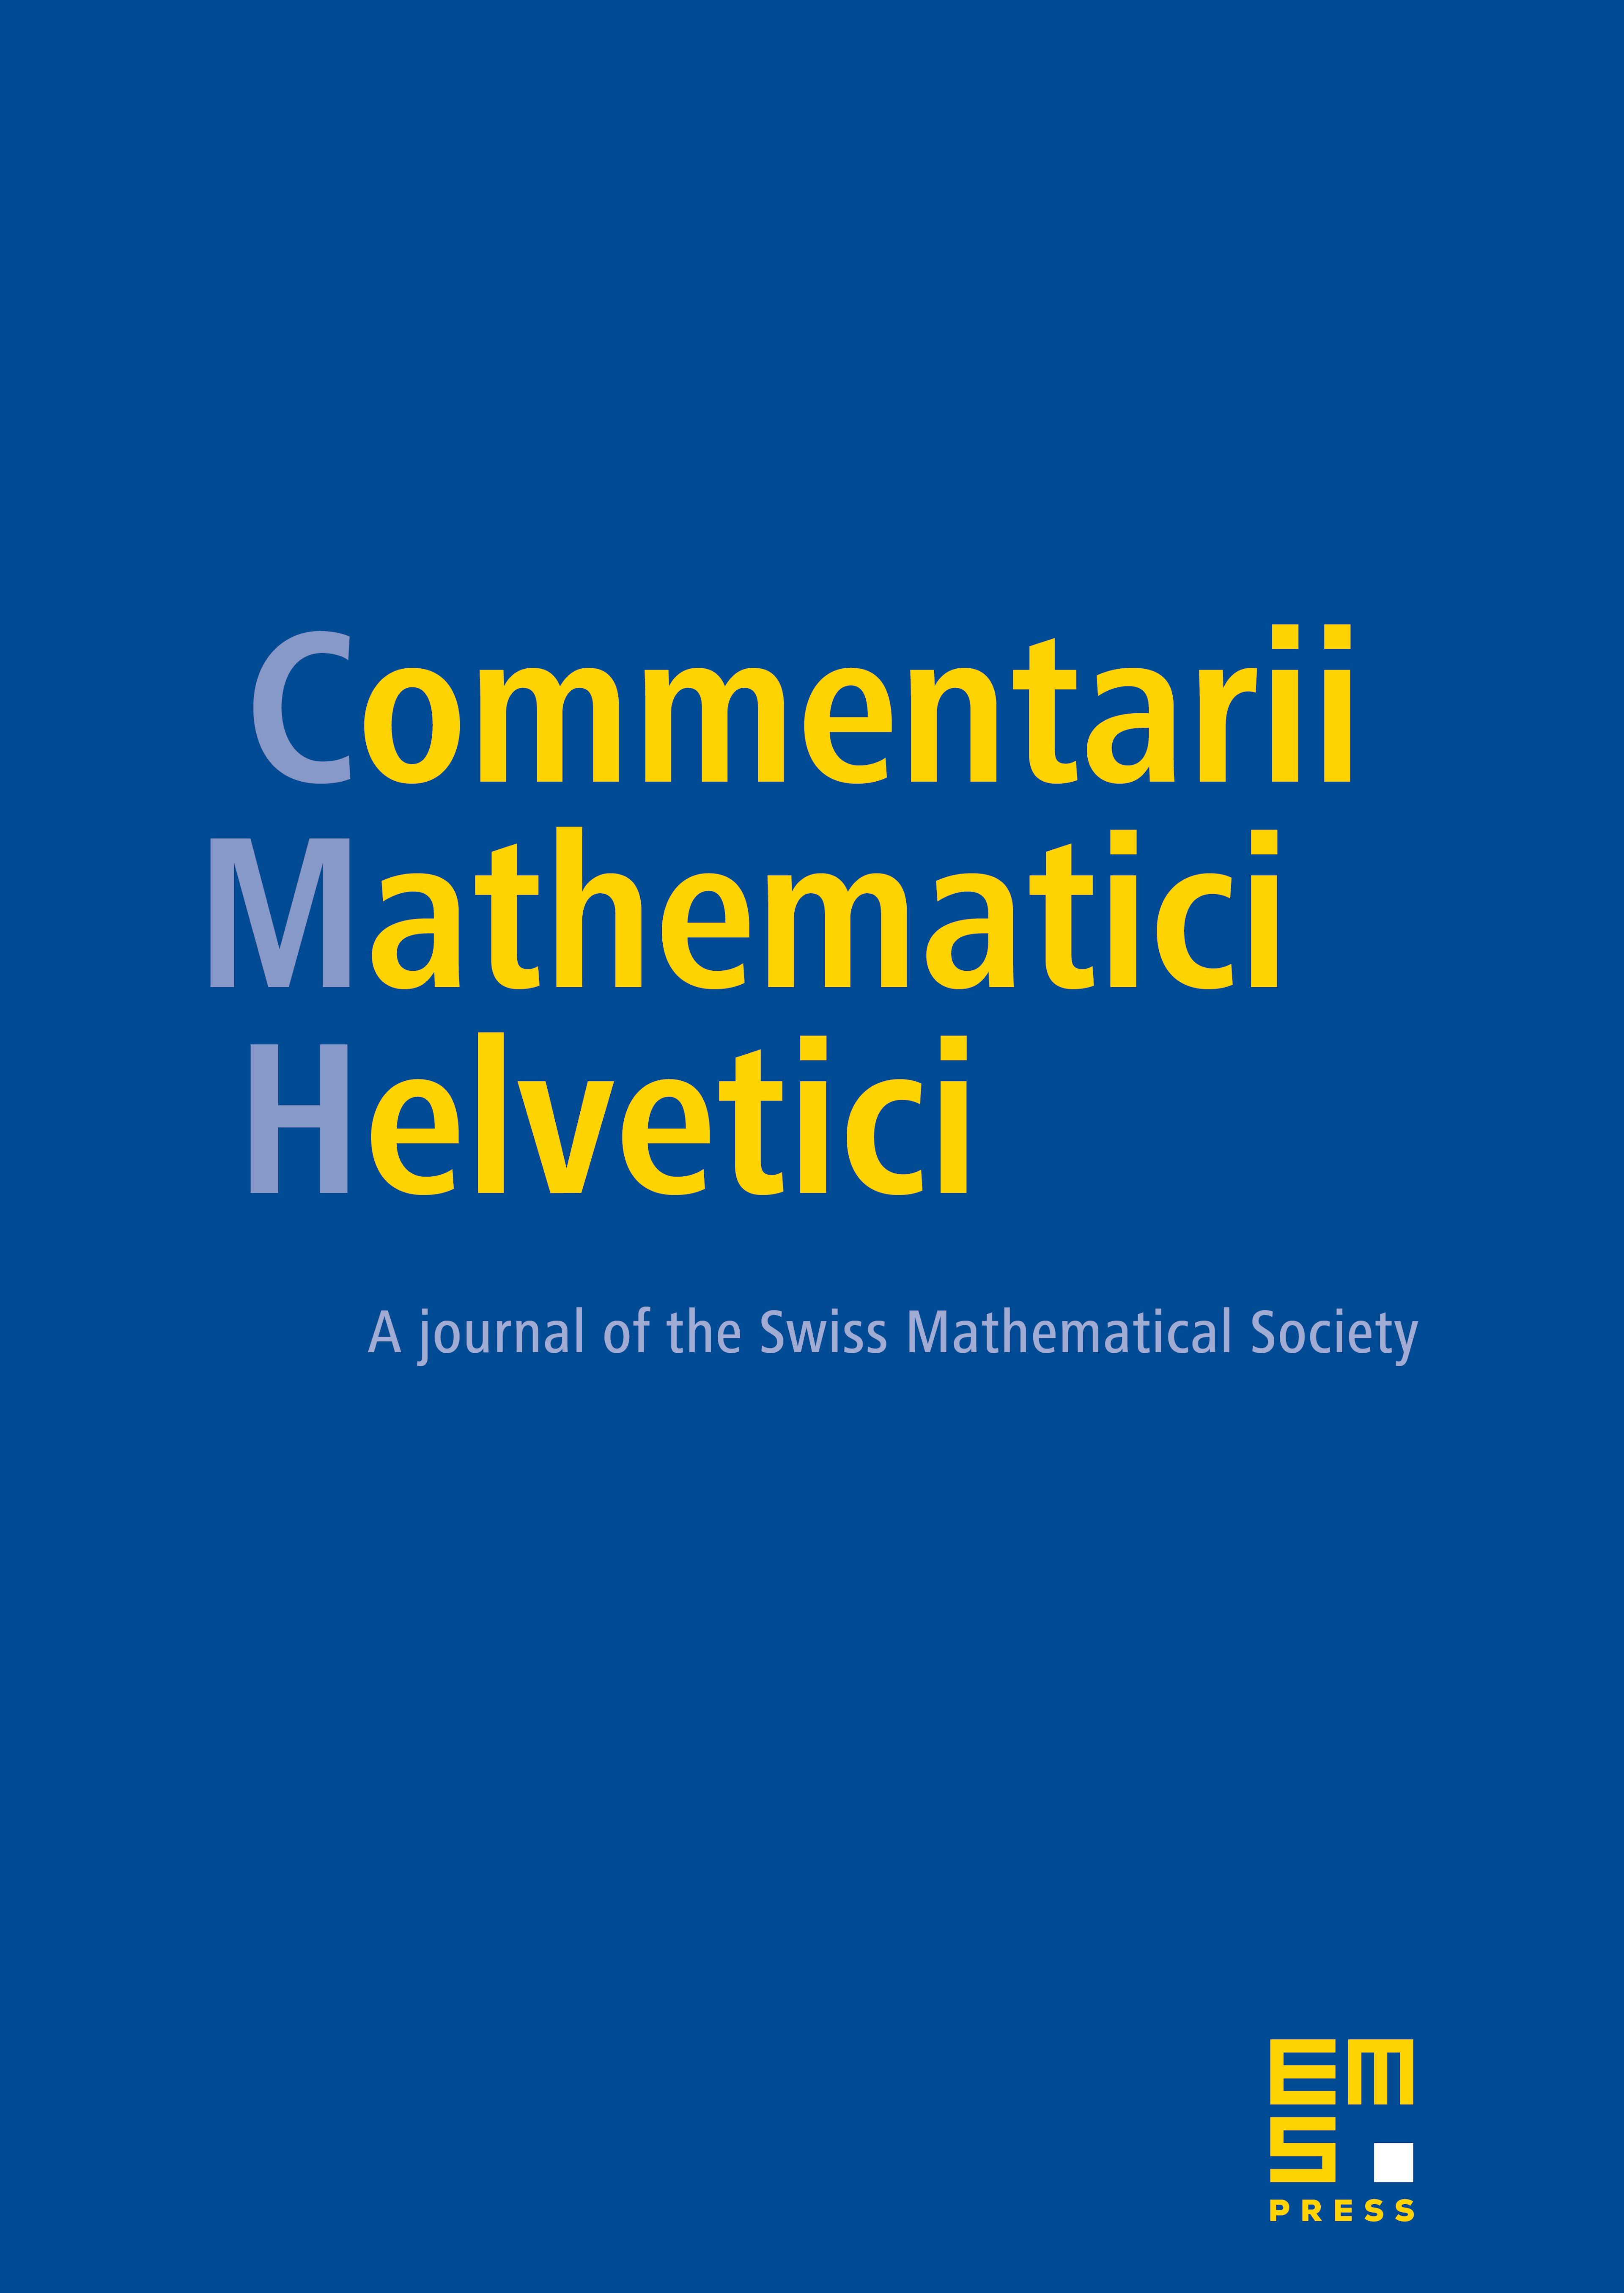 Extensions of Veech groups II: Hierarchical hyperbolicity and quasi-isometric rigidity cover